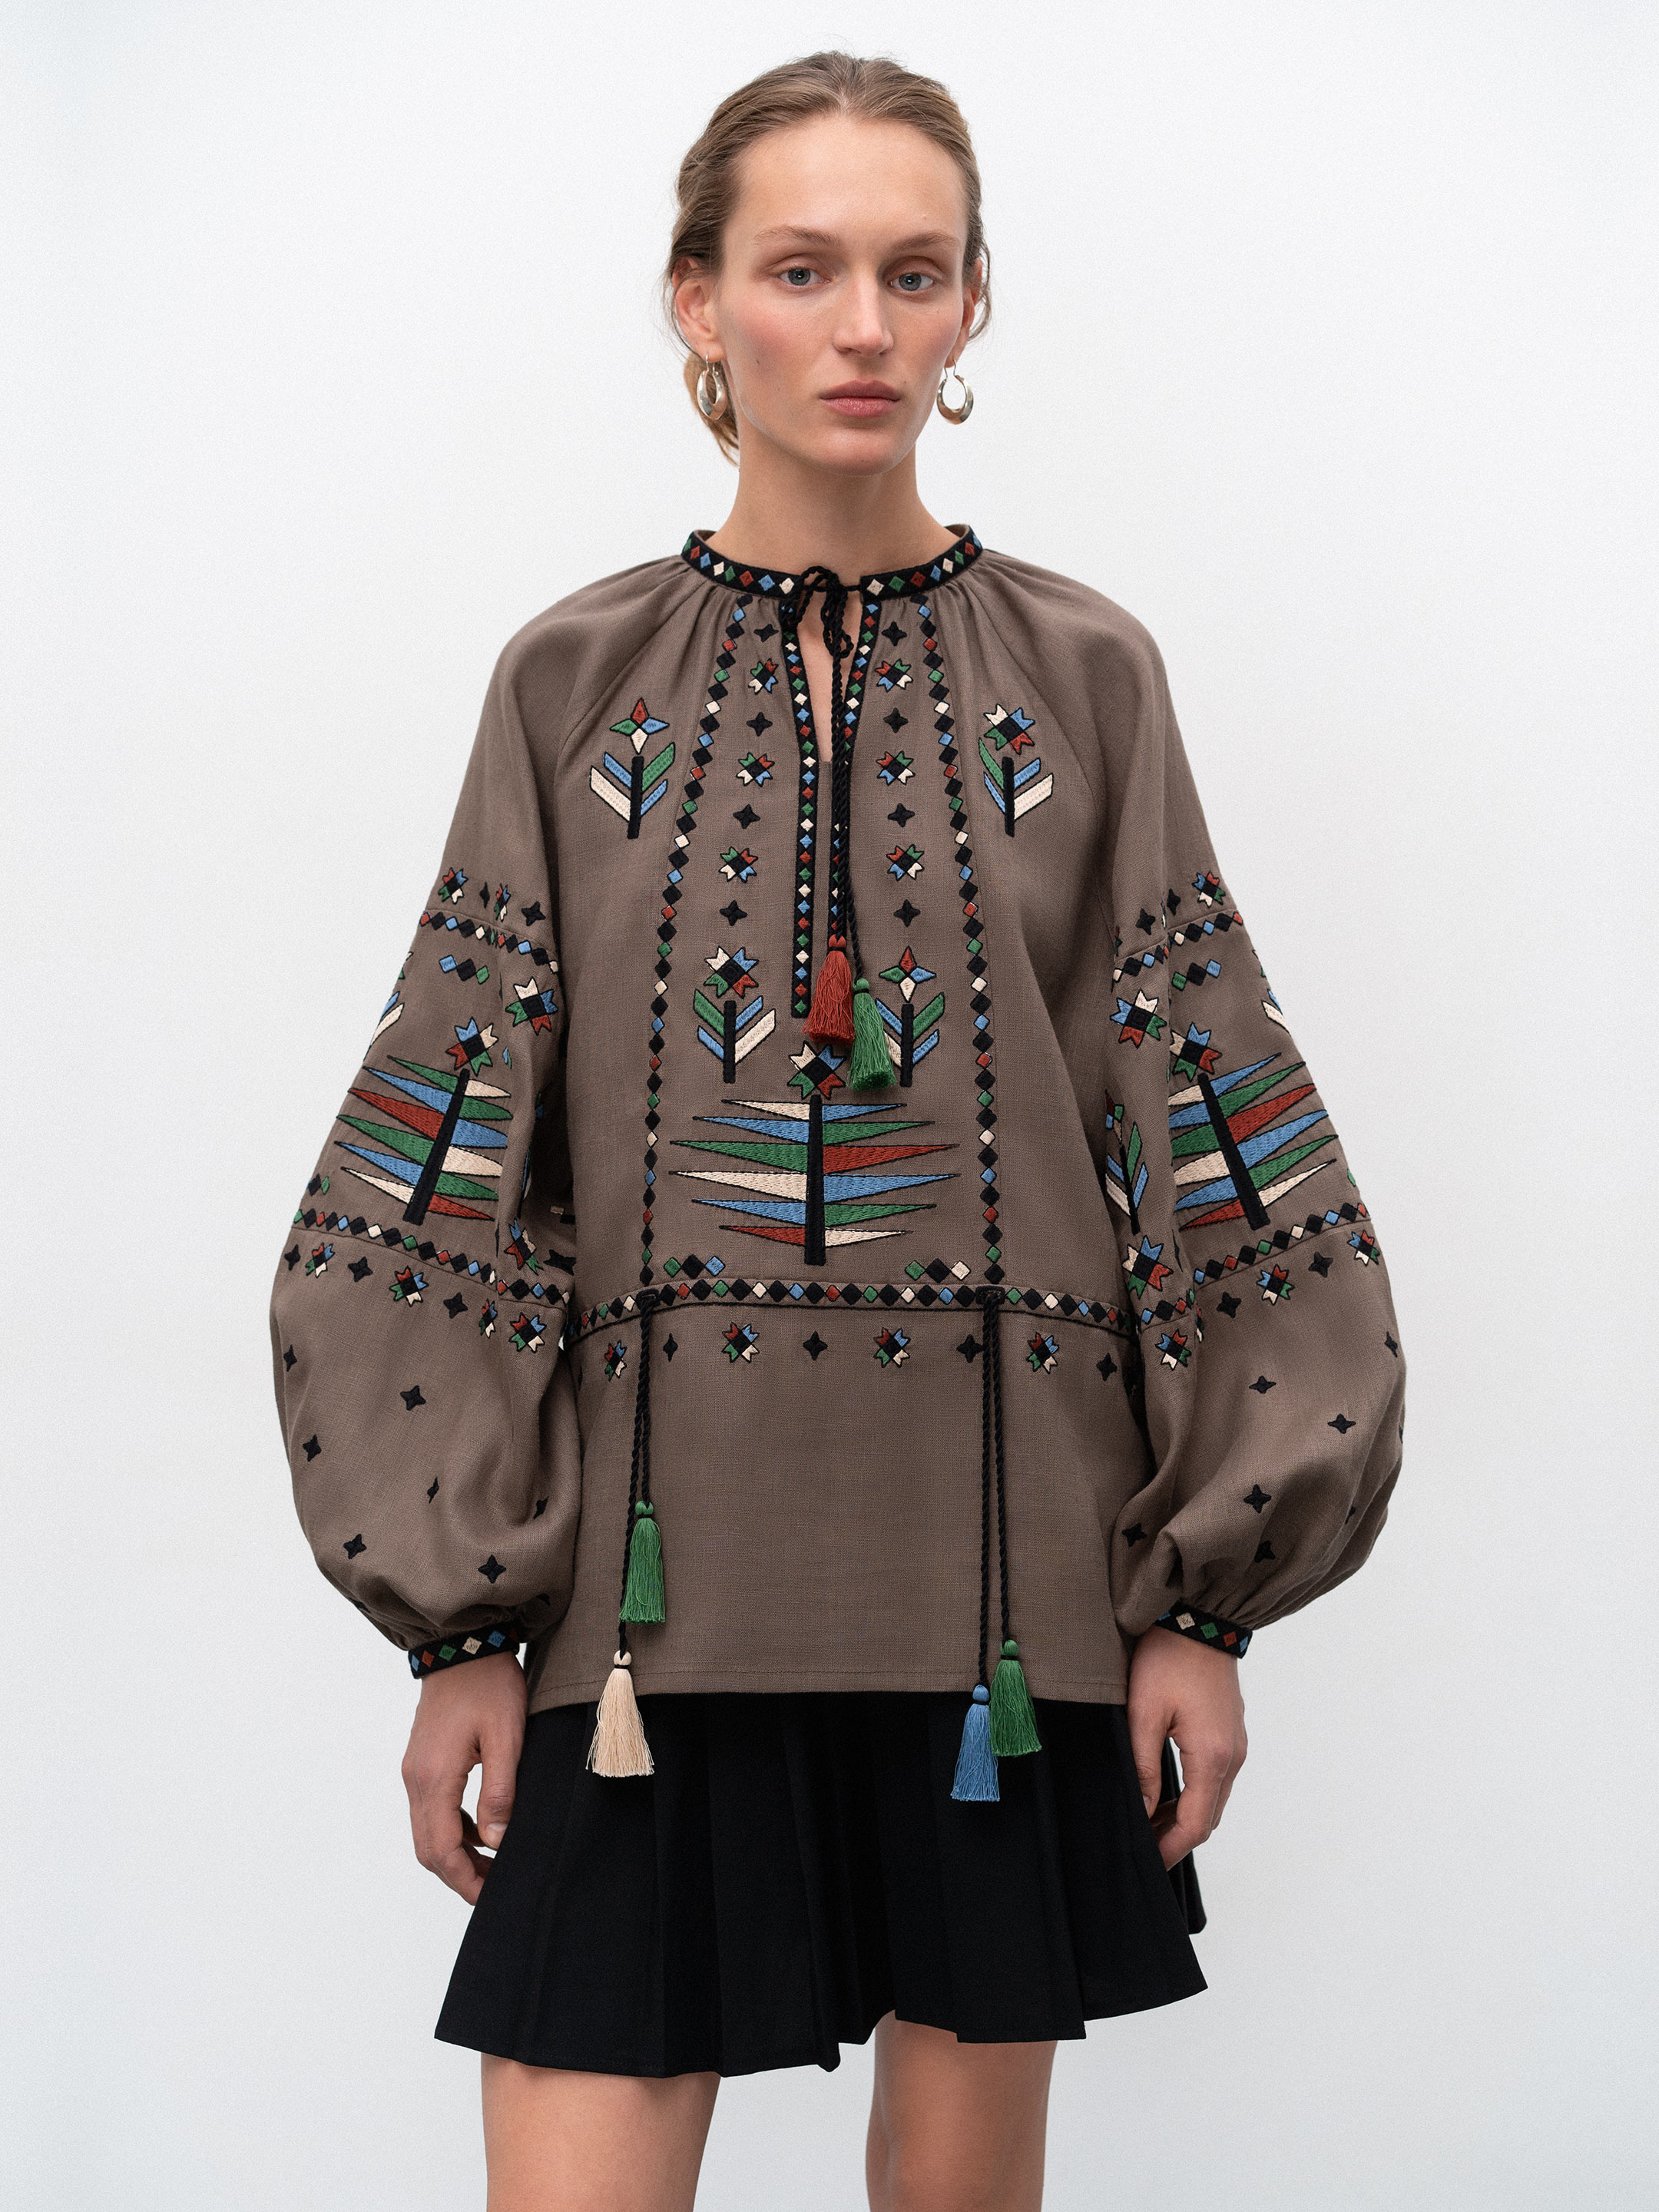 Women's embroidered shirt with geometric embroidery Melanka Temna - photo 1